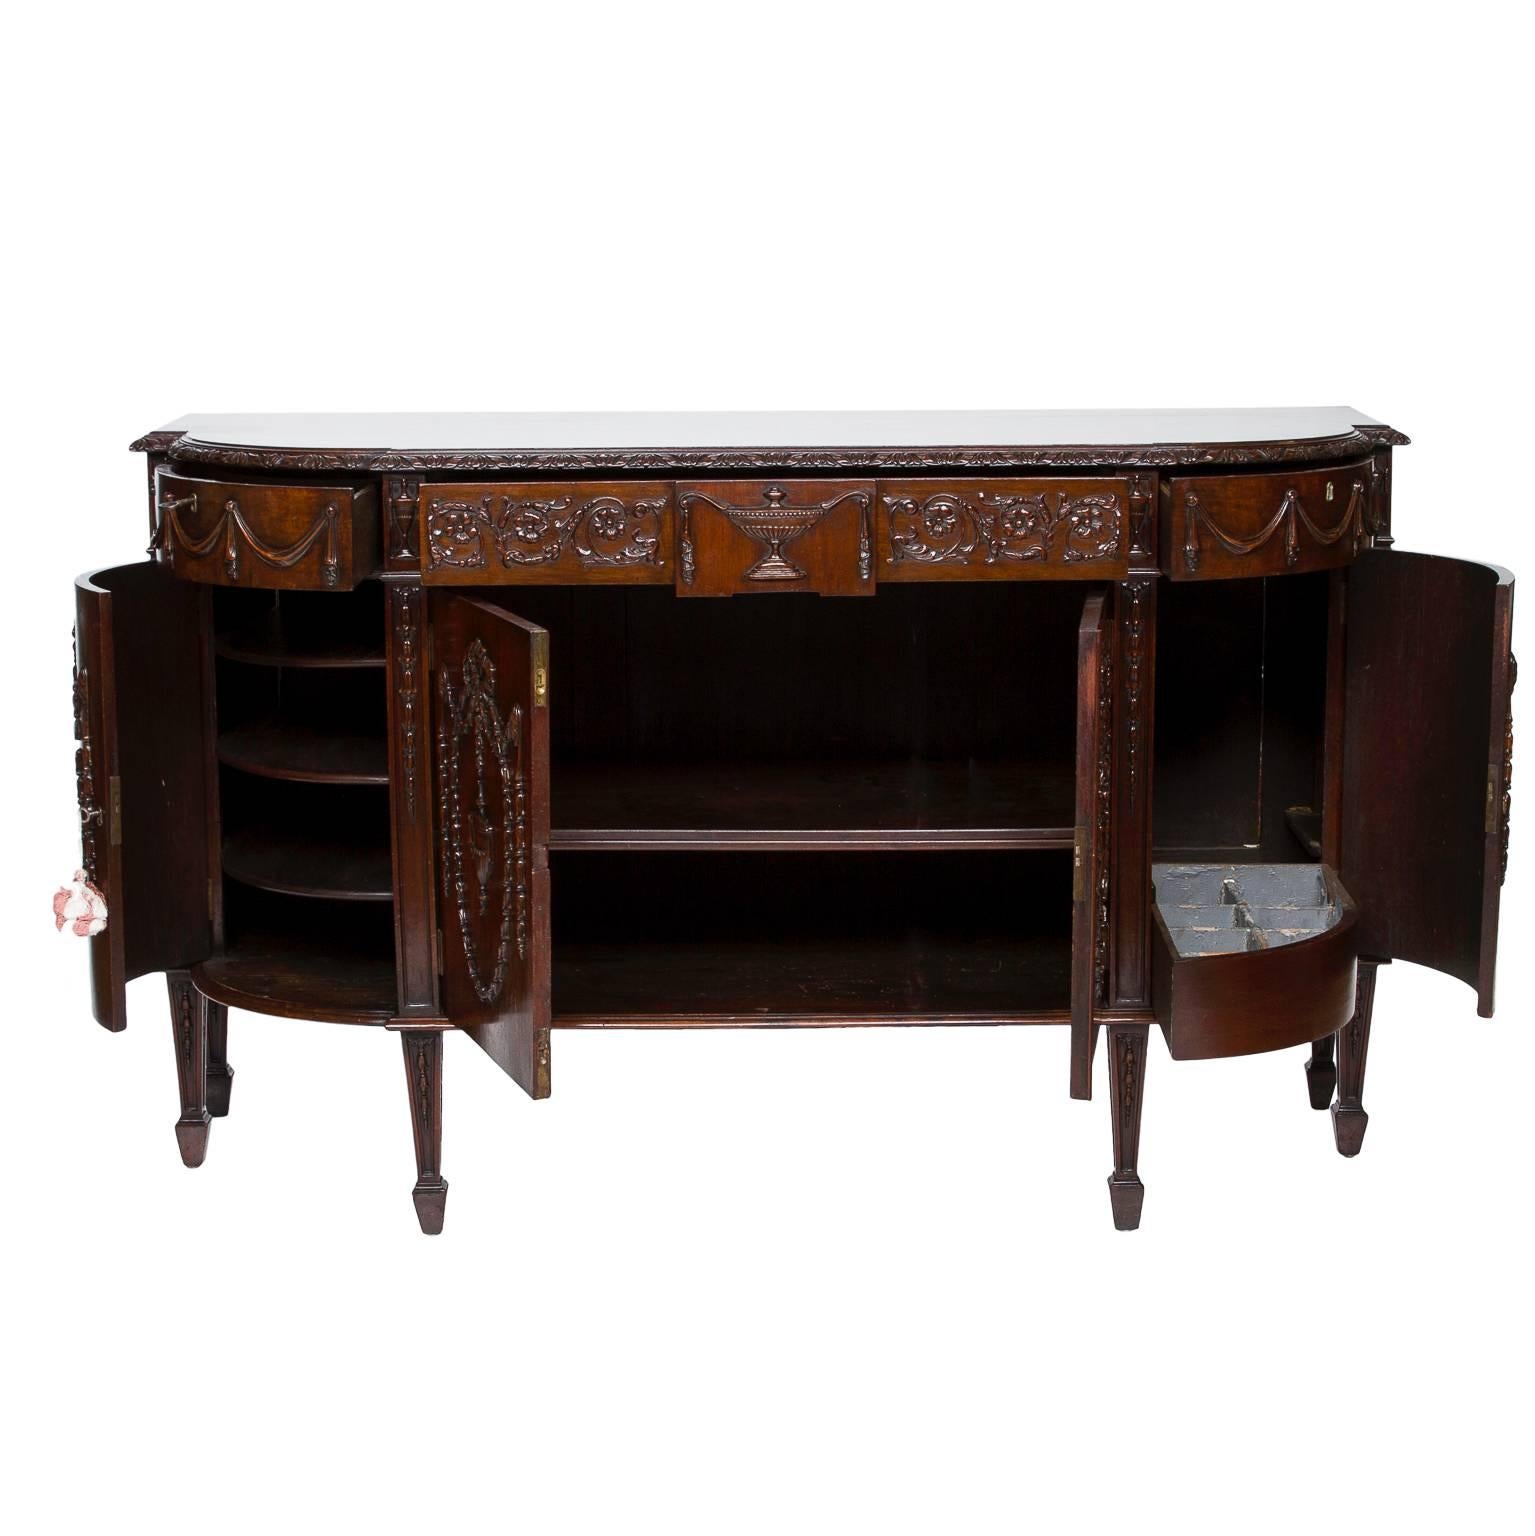 A striking 19th century Sheraton mahogany carved server with a breakfront. Rounded ends have drawers and cabinet storage. The center section to has storage behind the two carved doors. Unreal carvings adorn this server, with a french influence.